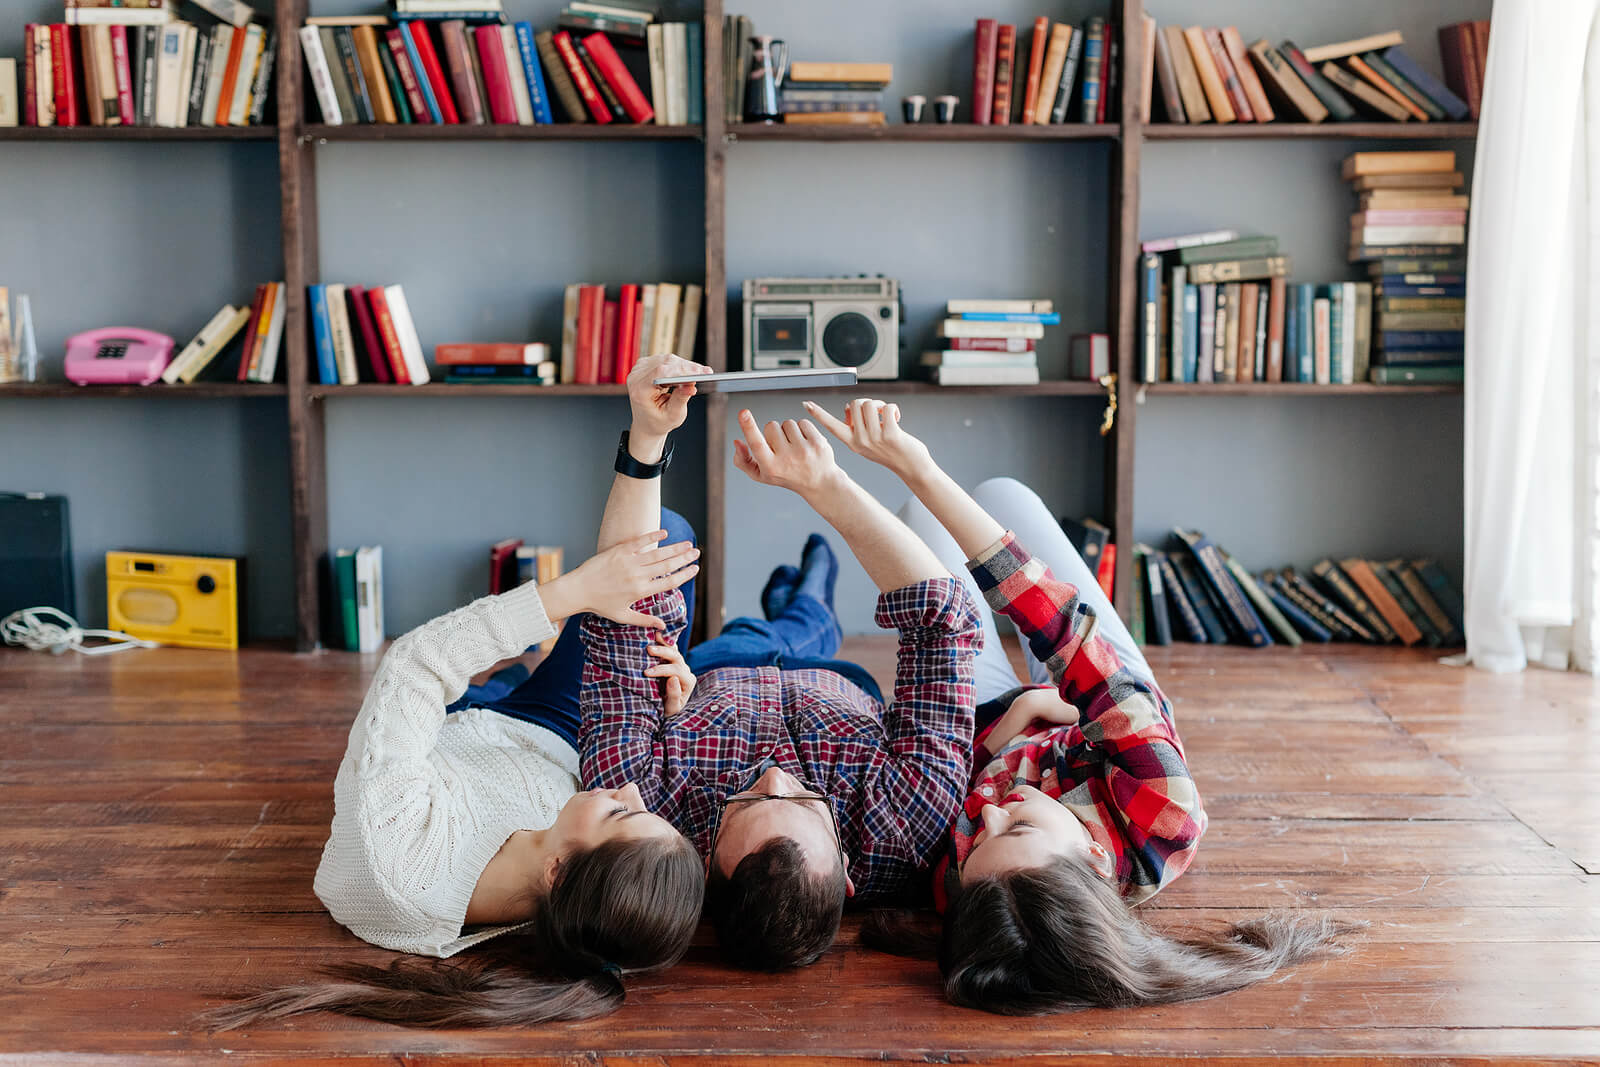 Three housemates laying on their backs on the floor of a room with lots of bookshelves, looking up at a tablet